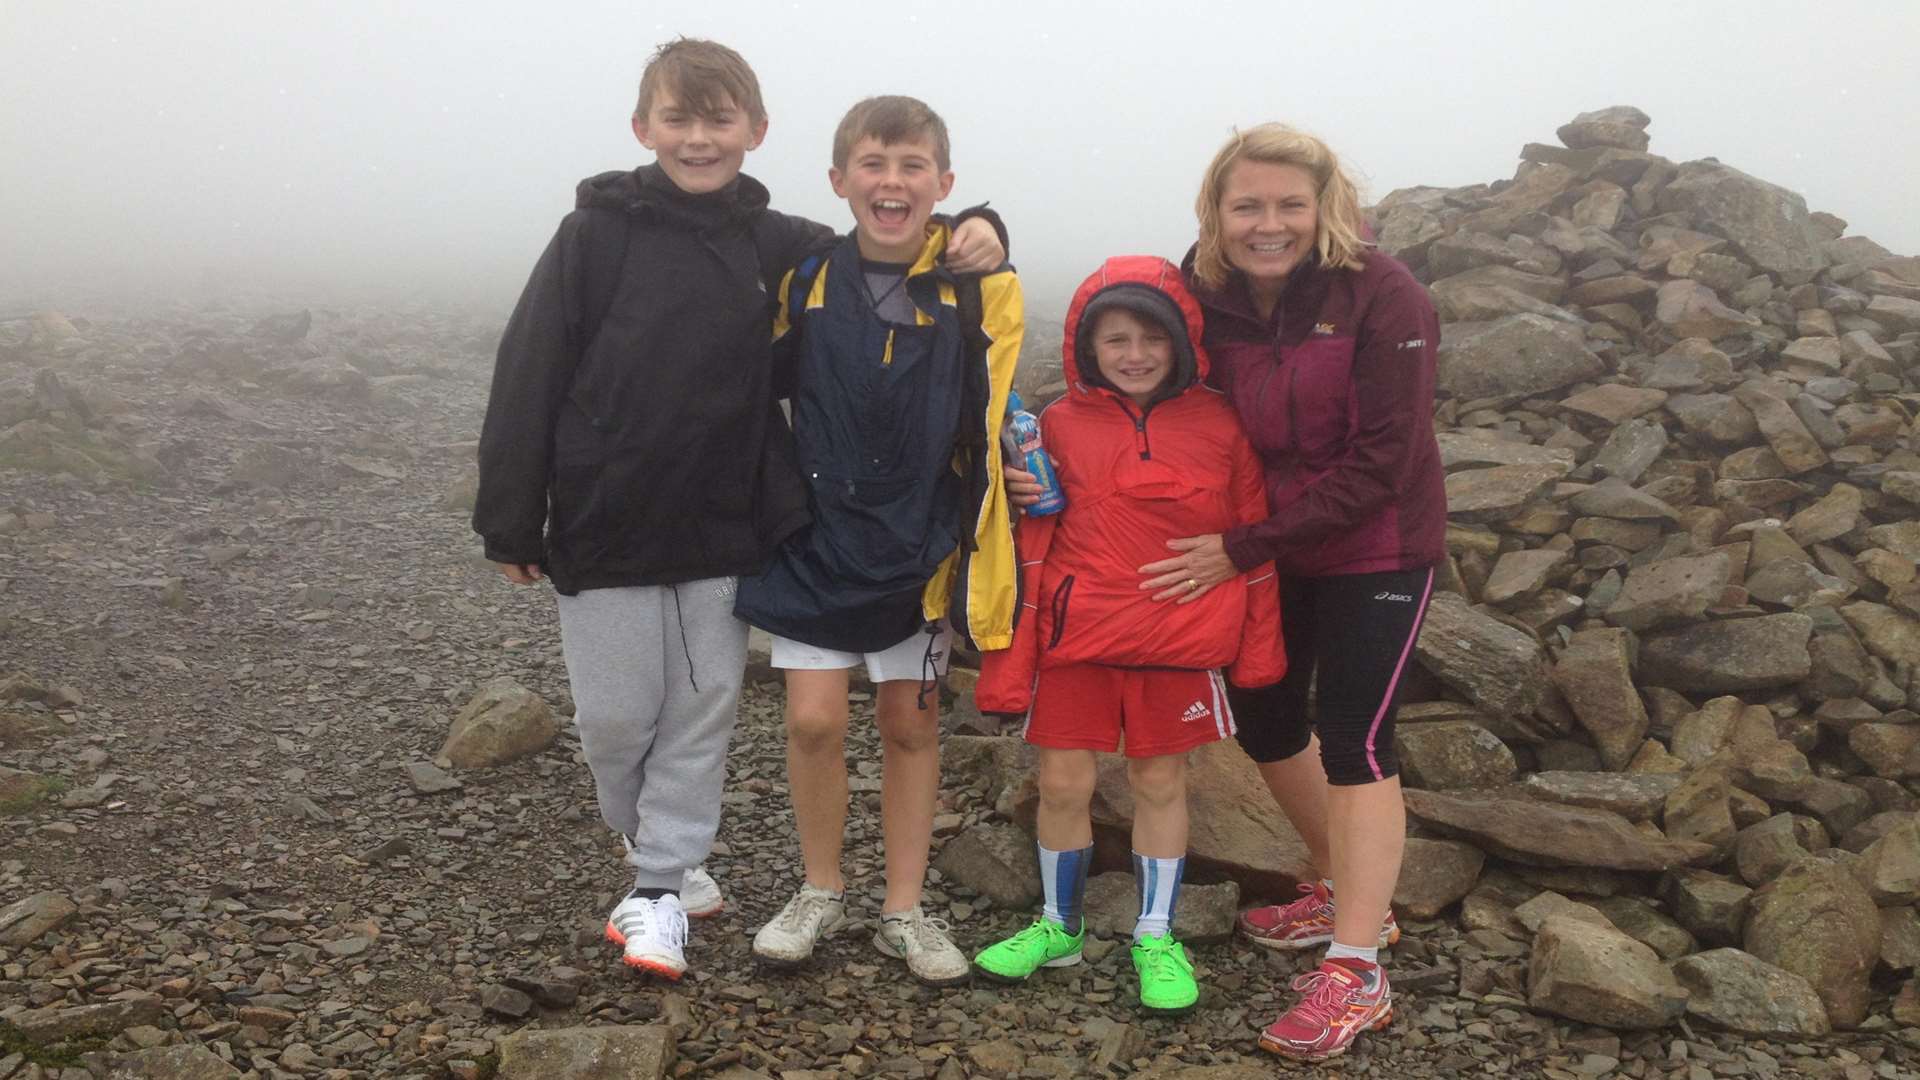 After beating cancer, Jacob made it to the top of Scafell Pike